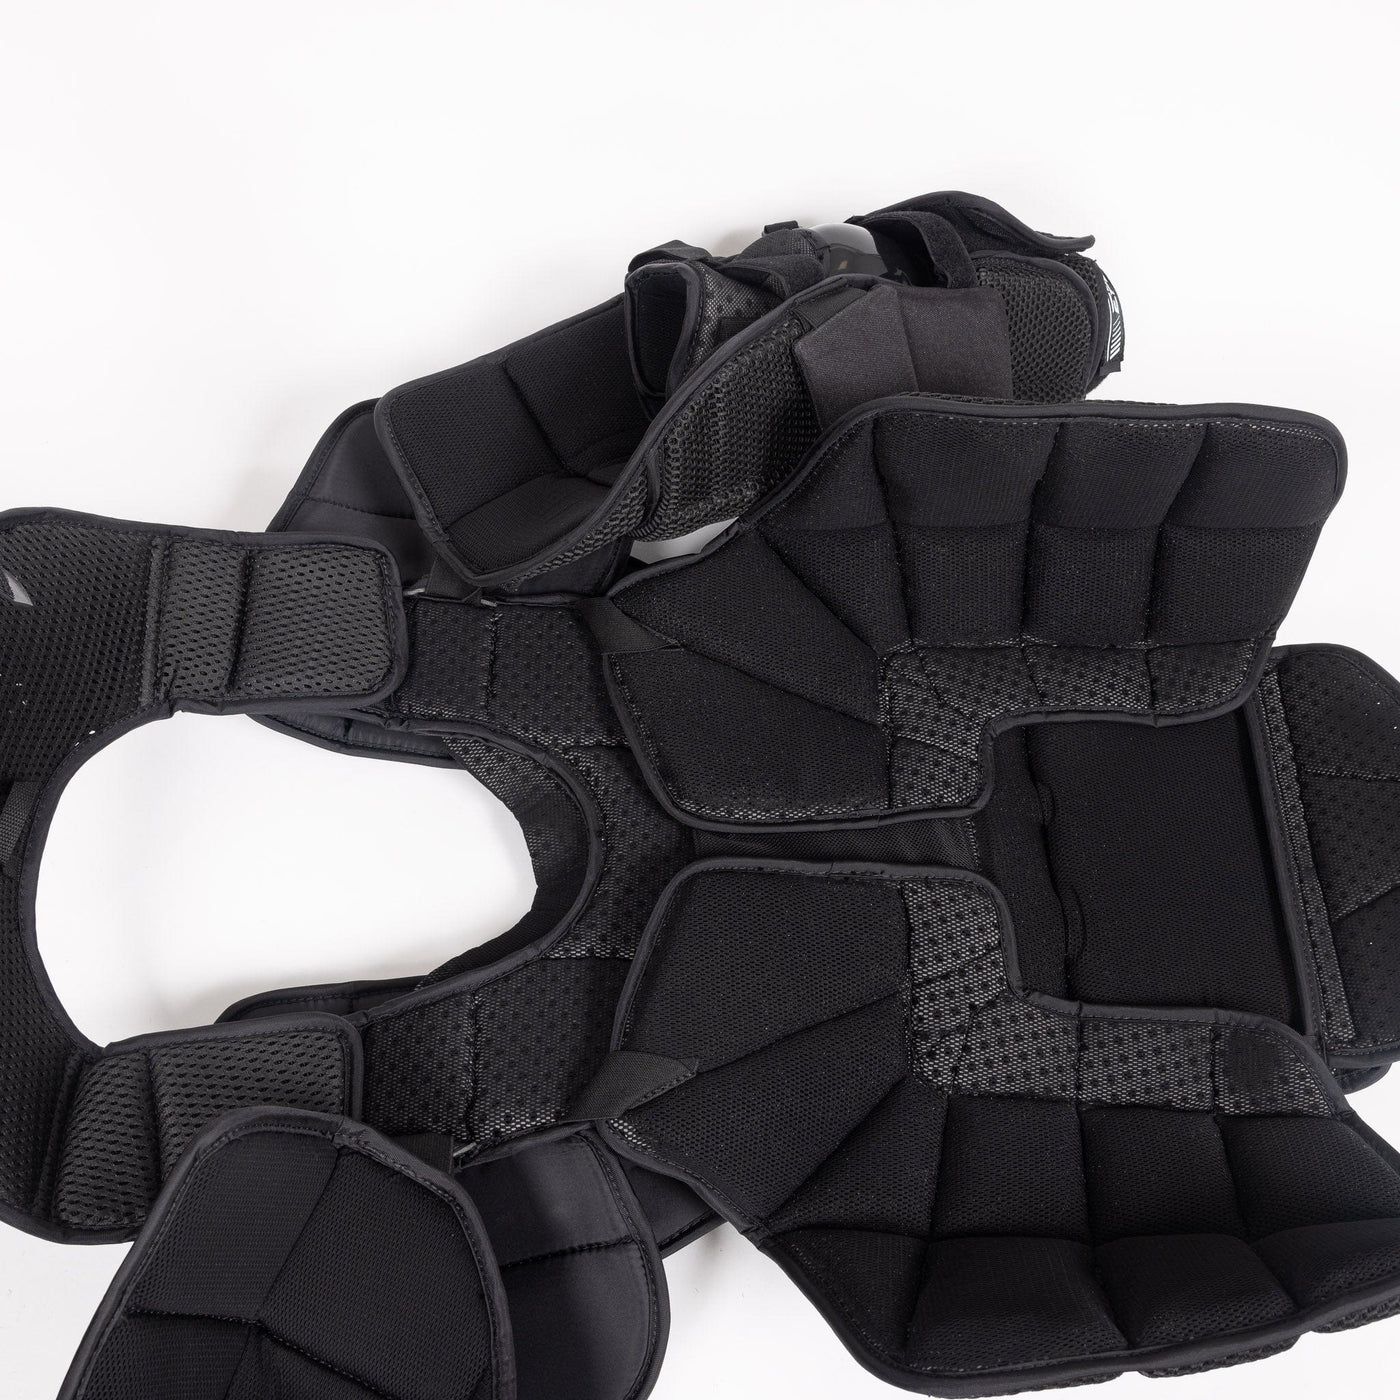 CCM Extreme Flex 6 Senior Chest & Arm Protector - Source Exclusive - The Hockey Shop Source For Sports